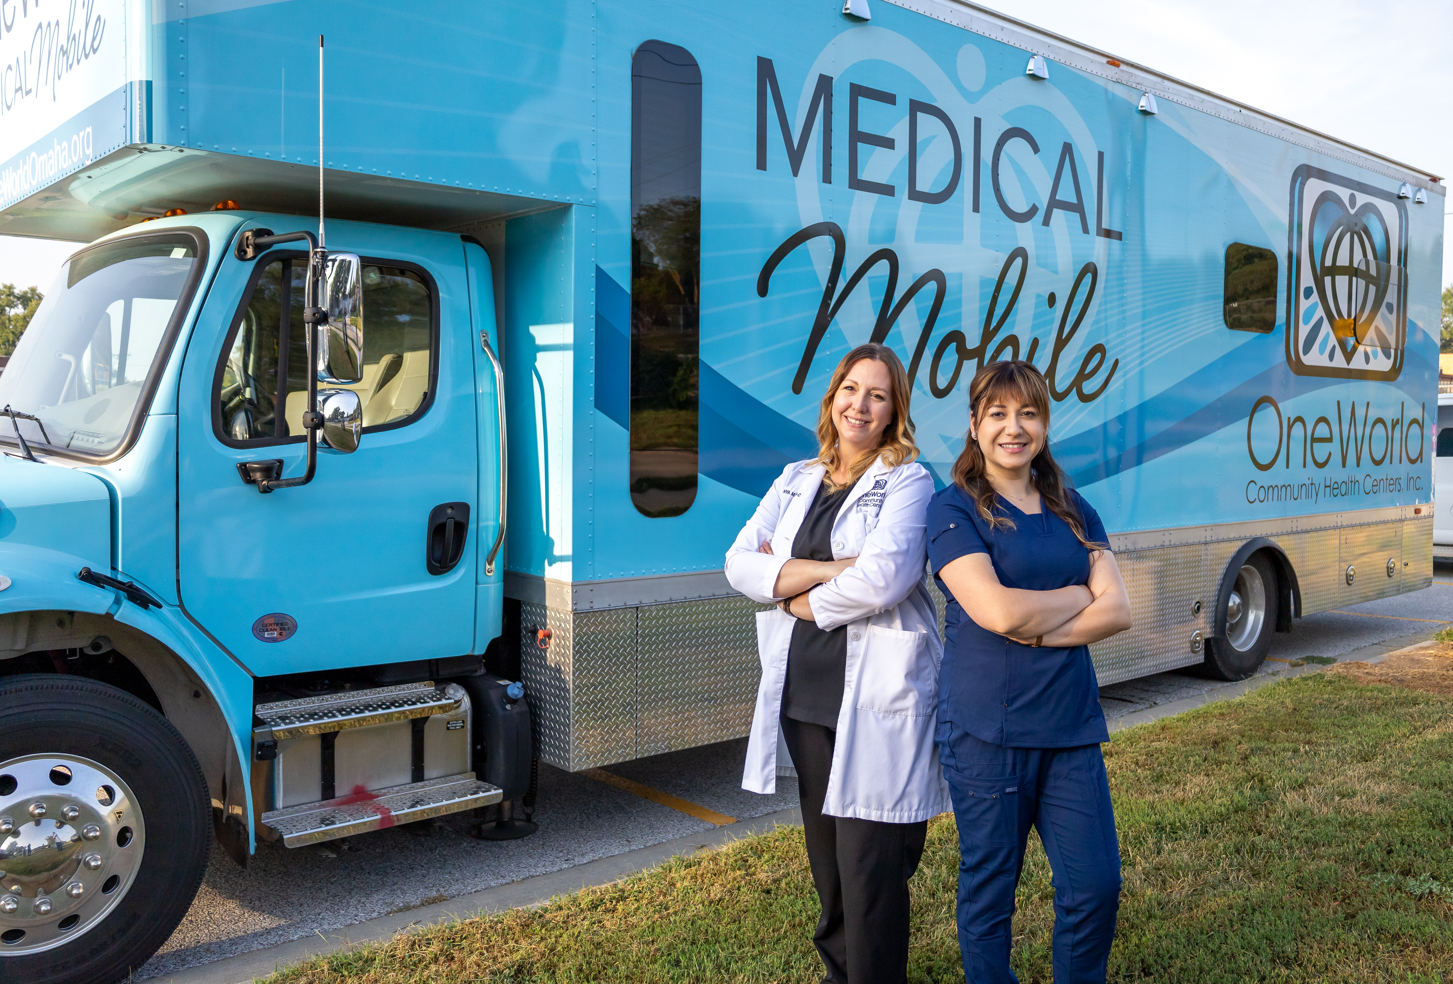 Family Medicine Physician Assistant, Tanya Martin, PA-C, and Health Assistant, Nancy Castillo, standing outside medical mobile smiling.